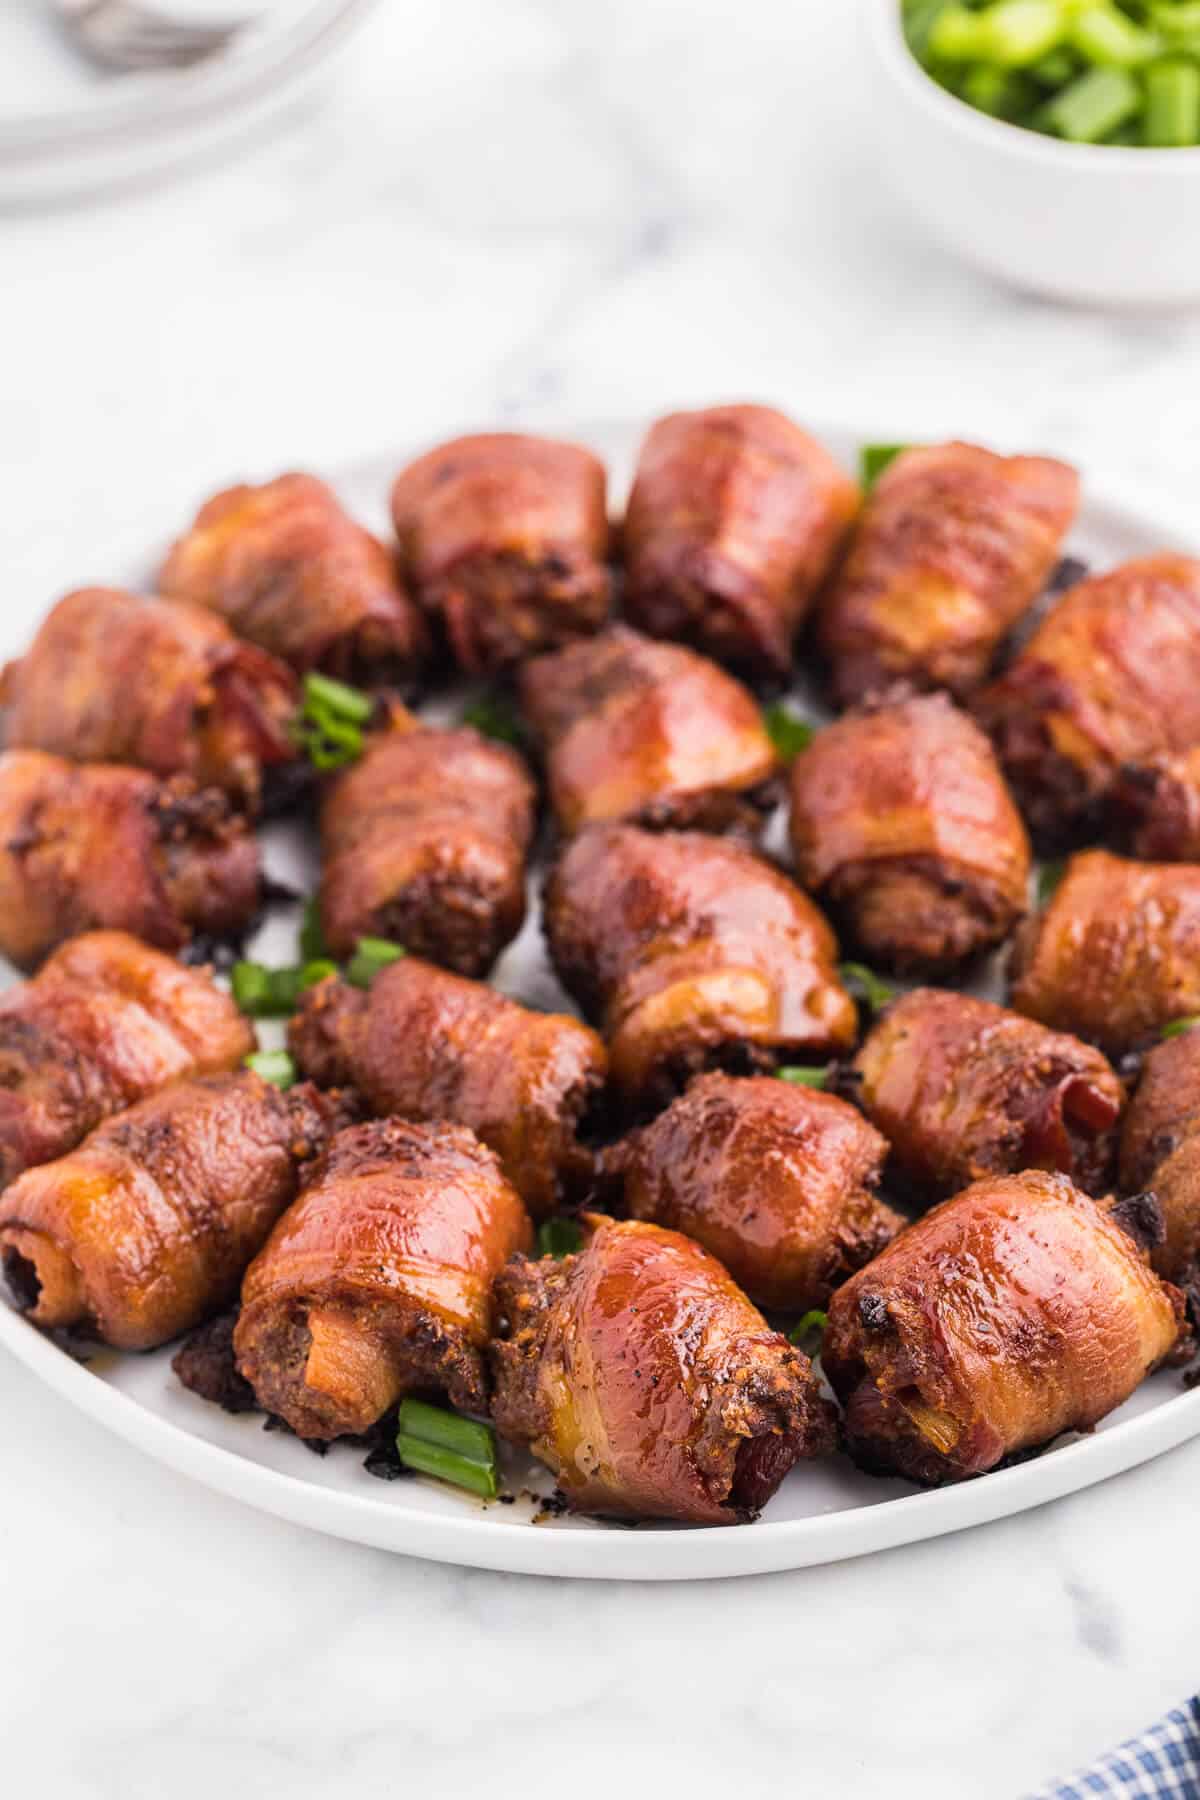 Stuffed Bacon Rolls - A great party appetizer! Smoky bacon wrapped around juicy meatballs for a meaty snack.